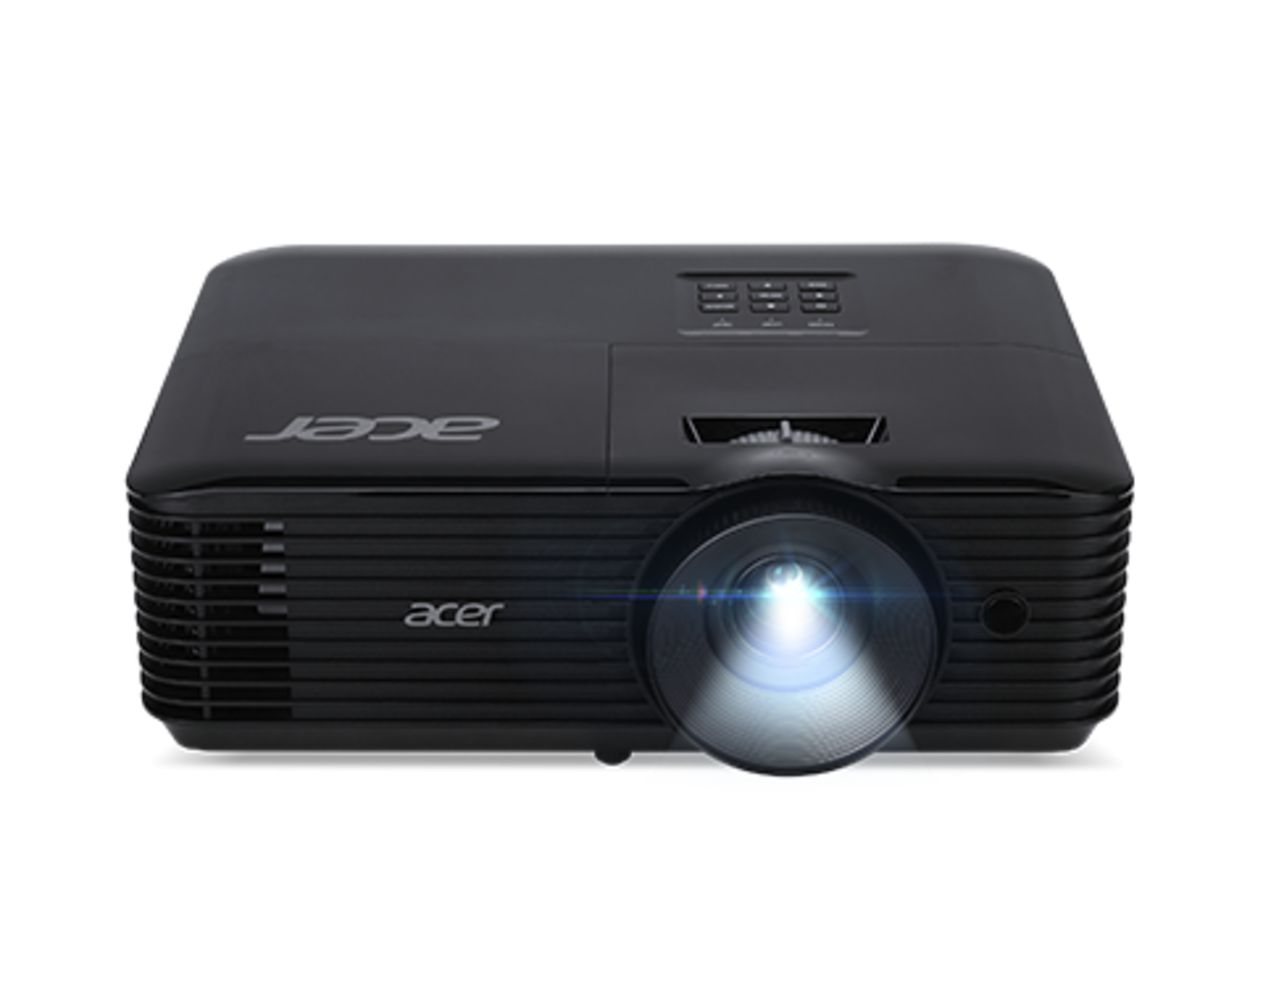 Proiector ACER X1529HP, DLP 3D, FHD 1920* 1080, up to WUXGA 1920* 1200, 4500 lumeni, 16:9/ 4:3, 10.000:1, zoom 1.1X, lampa 4.000 ore/ 20.000 ore EcoPro, 26- 35 dB, boxa 3W, D-sub, 2* HDMI, PC audio, USB A (5V/1.5A, USB Type A), RS232, greutate 2.88 kg, Acer BlueLight Shield, 24/ 7, WirelessMirror_1